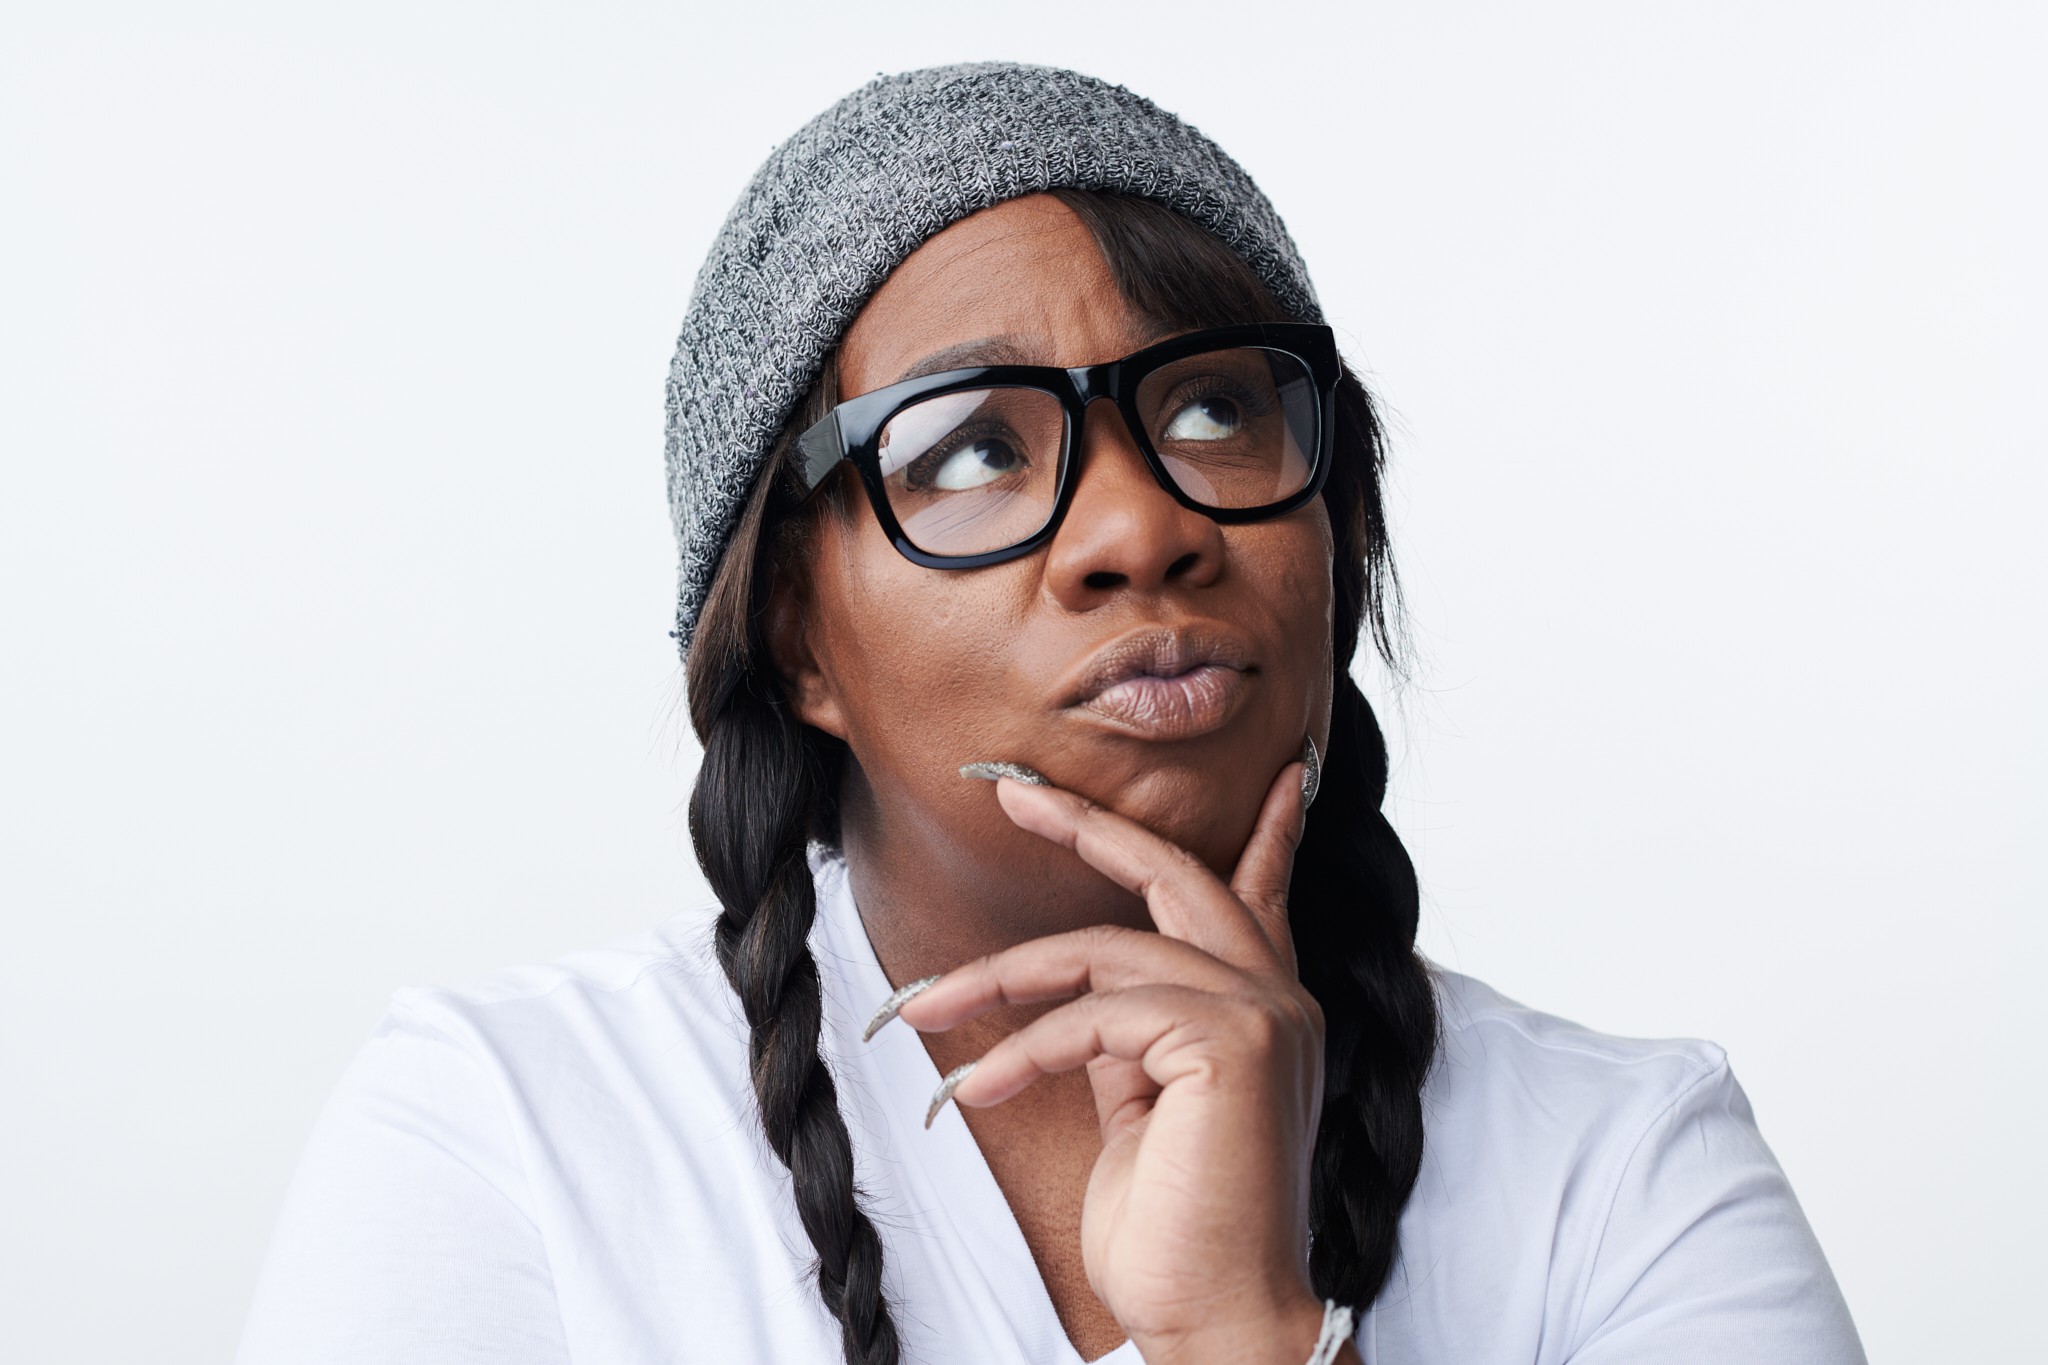 Franqi French holding her hand up to her chin looking pensive towards the cieling. She is wearing her hair in braids with a beanie and glasses.